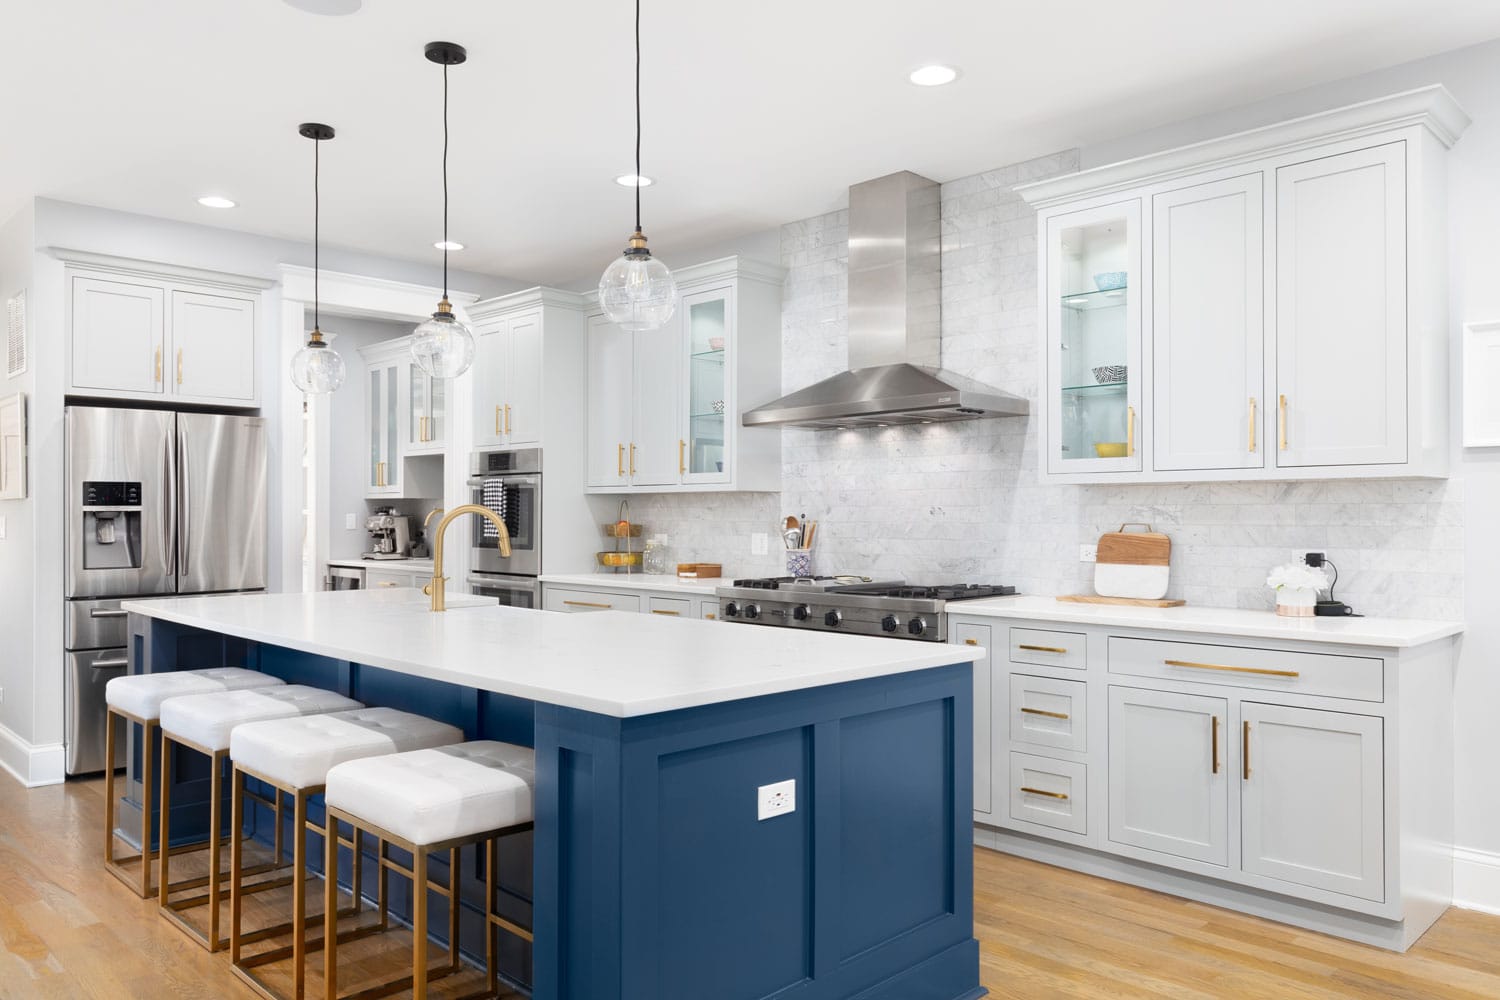 Ultra-modern kitchen with blue kitchen island with matching white granite countertop